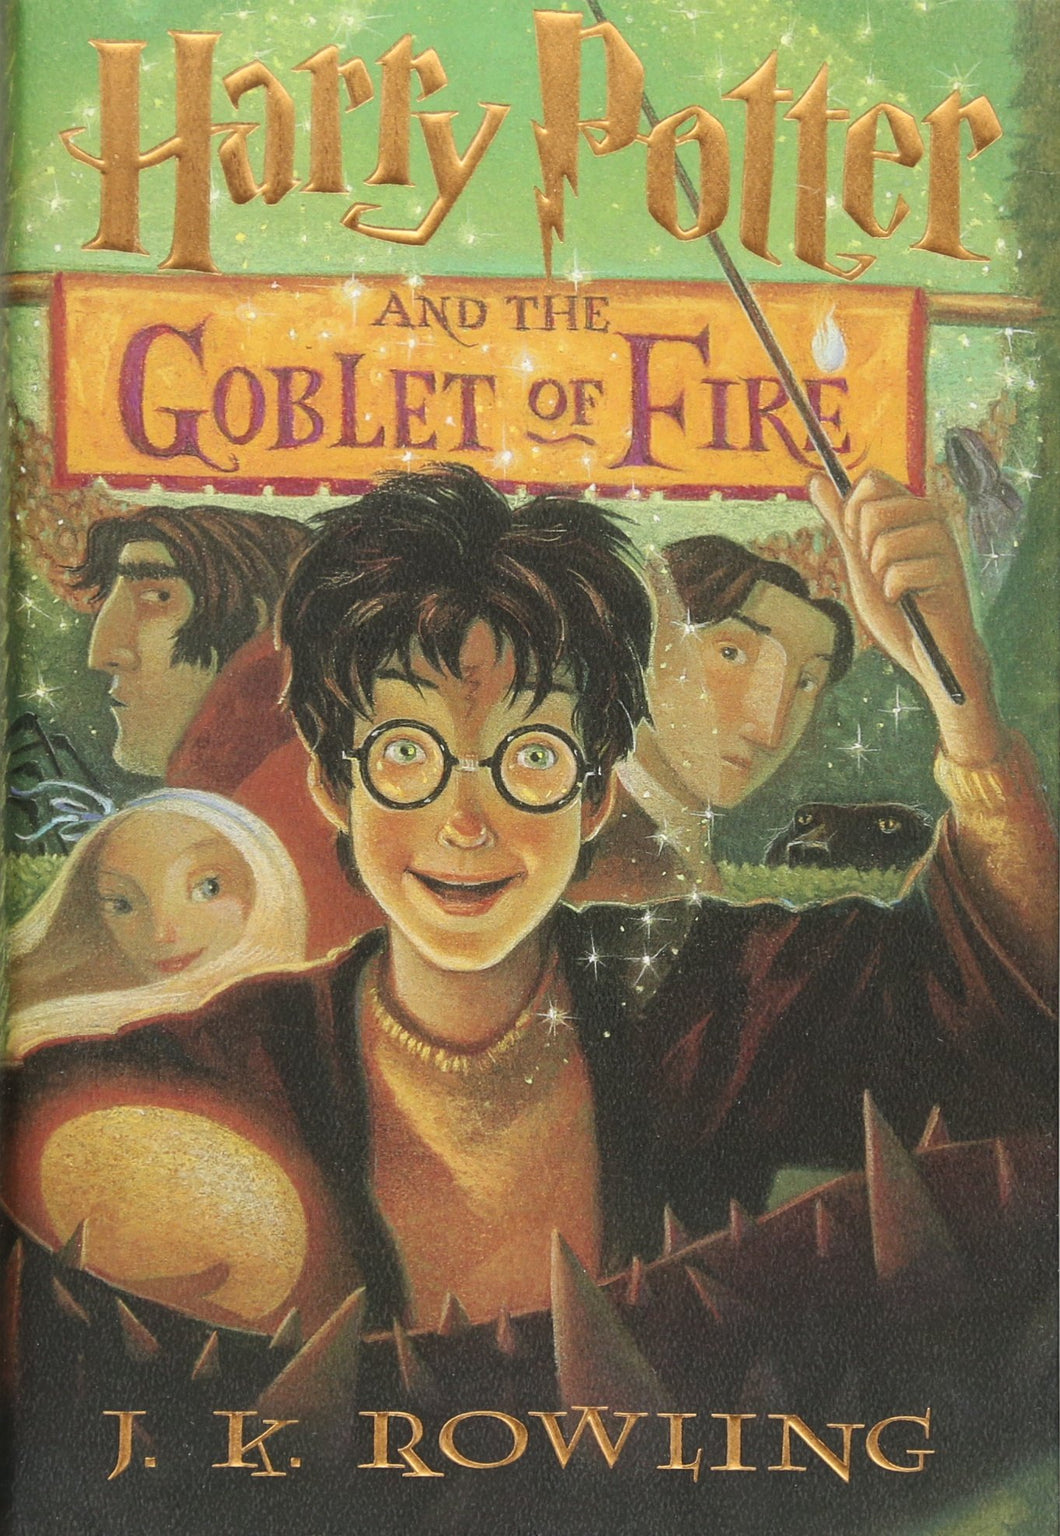 Harry Potter And The Goblet Of Fire (Hardcover)